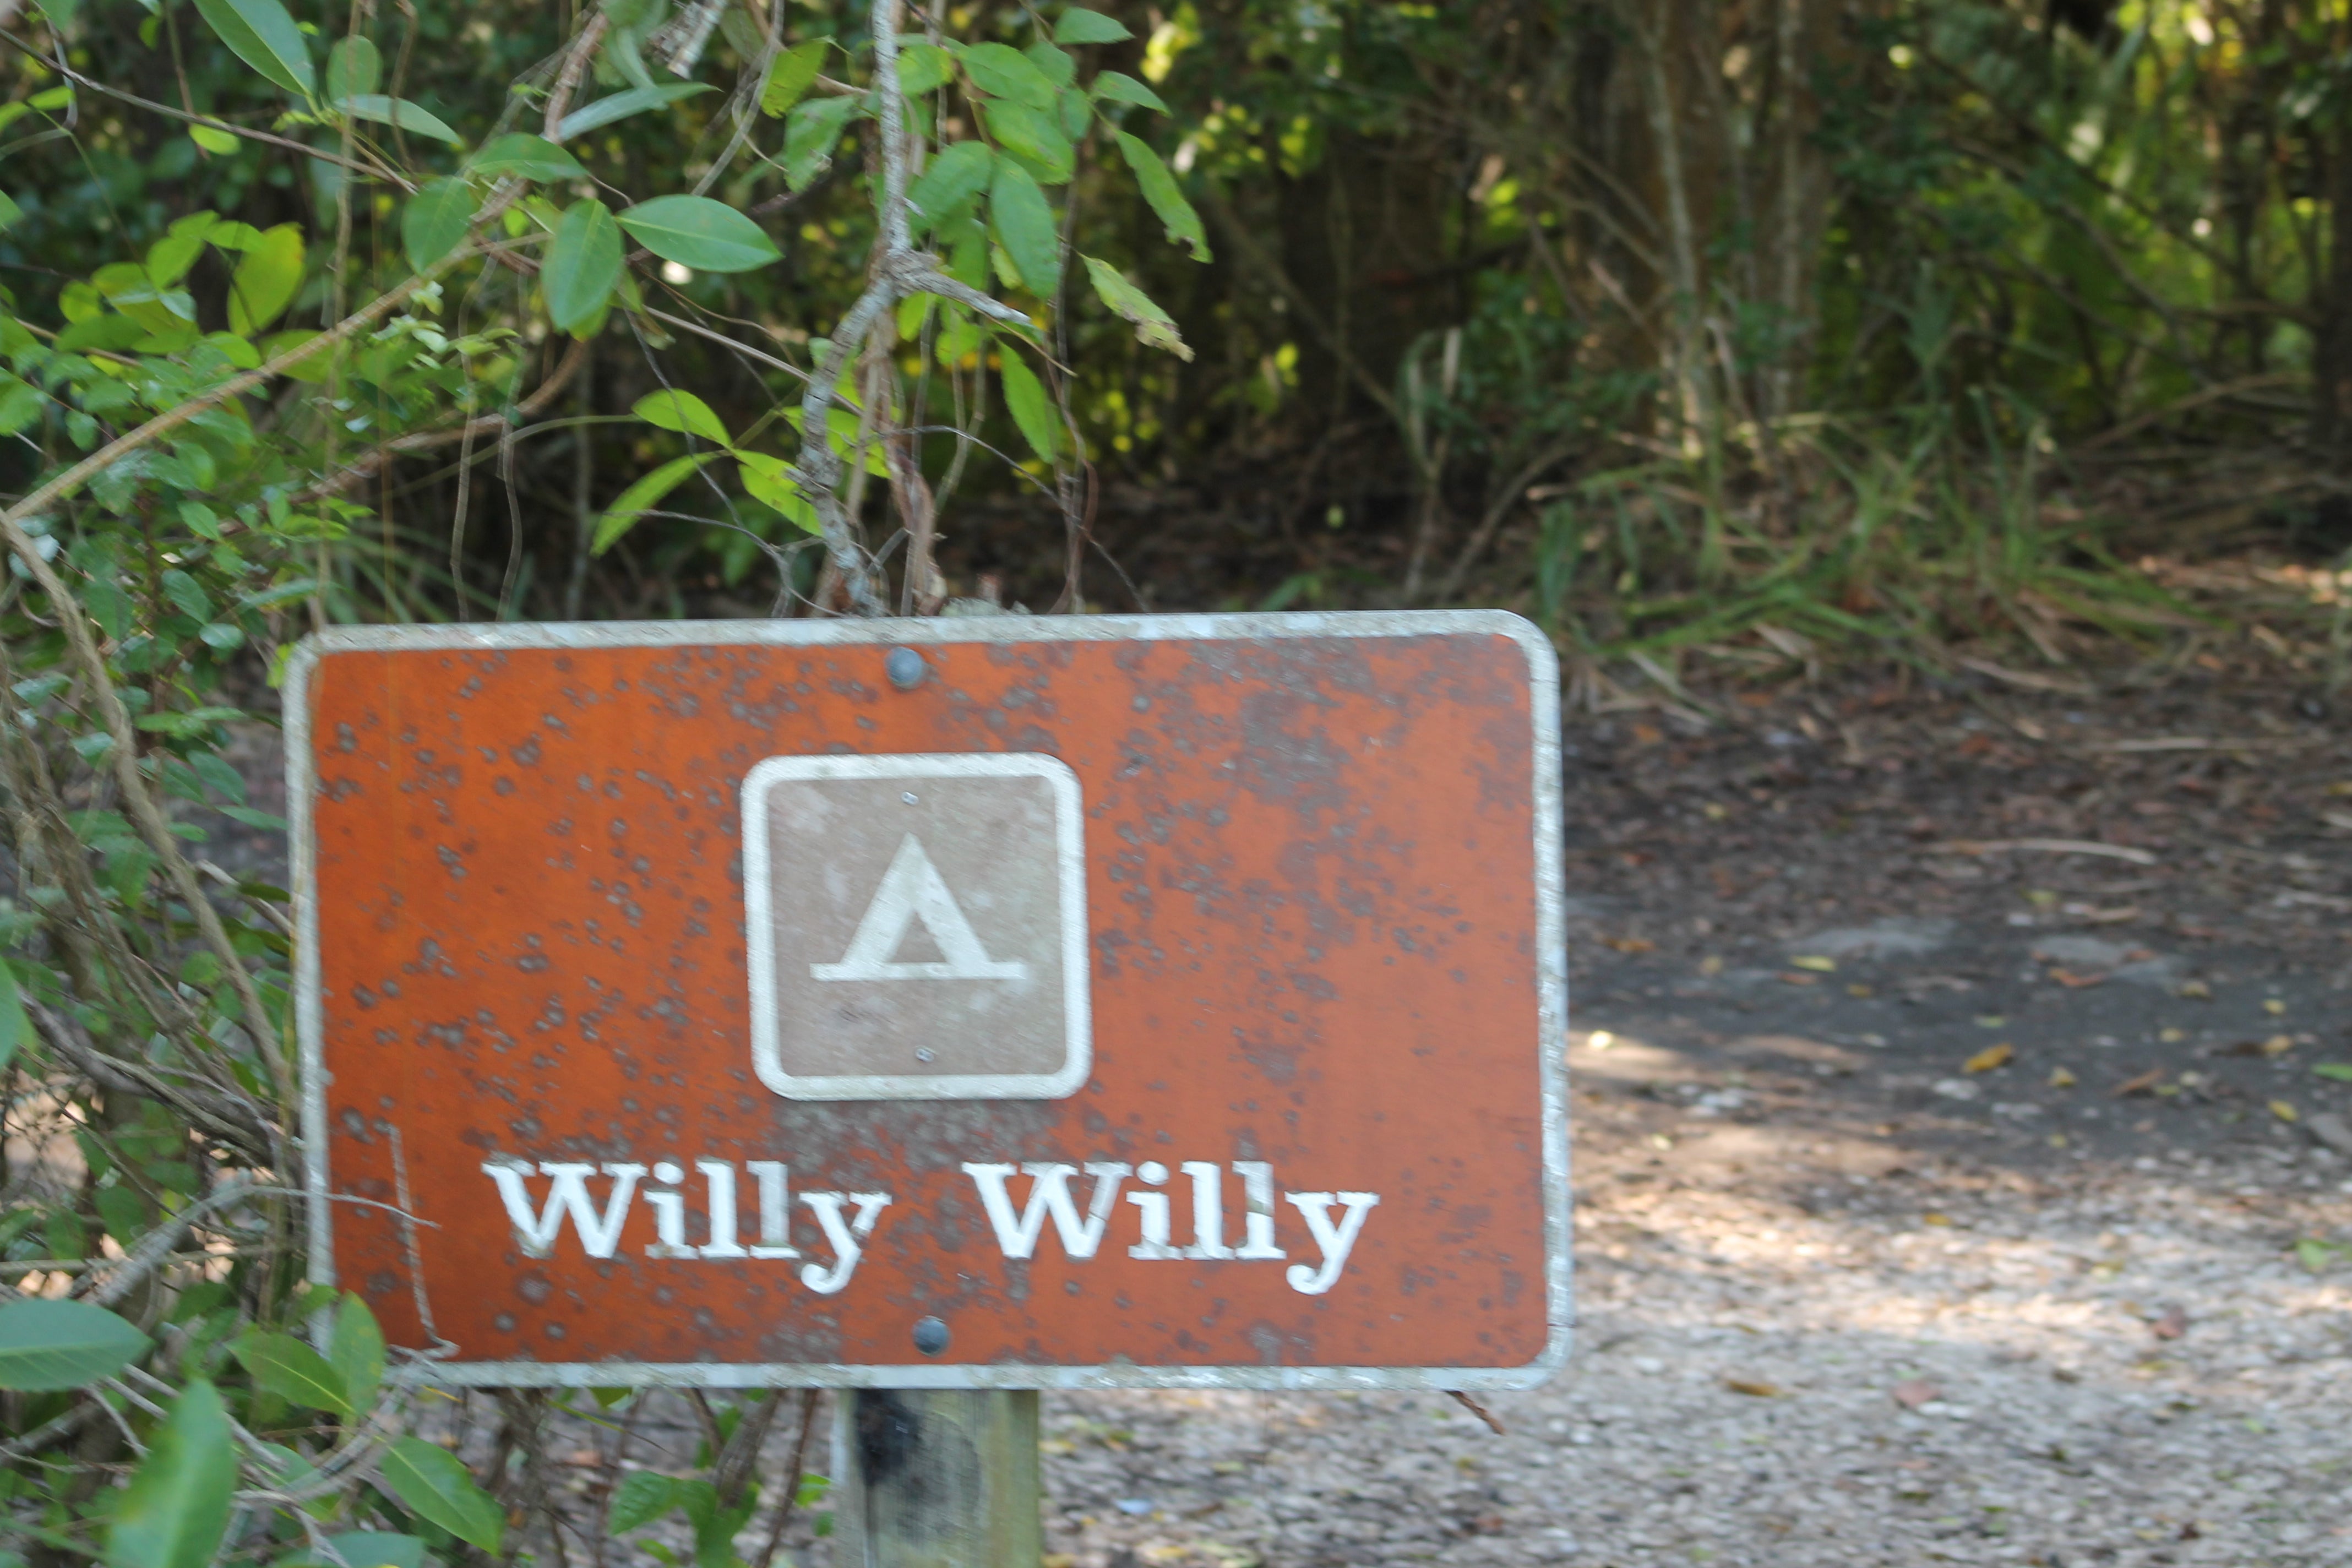 Camper submitted image from Willy Willy Wilderness Campground — Everglades National Park - 4